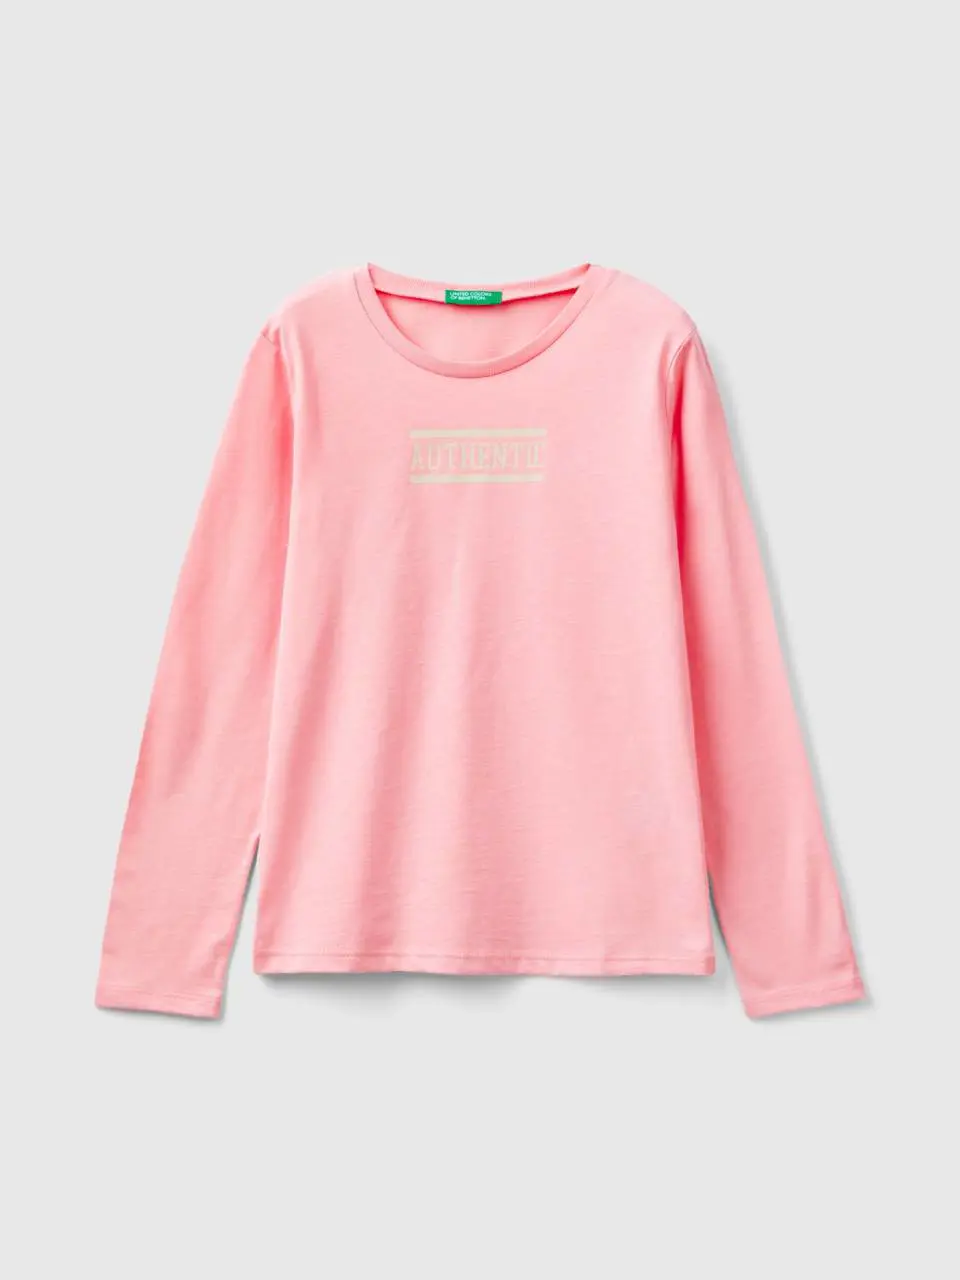 Benetton t-shirt with text print. 1